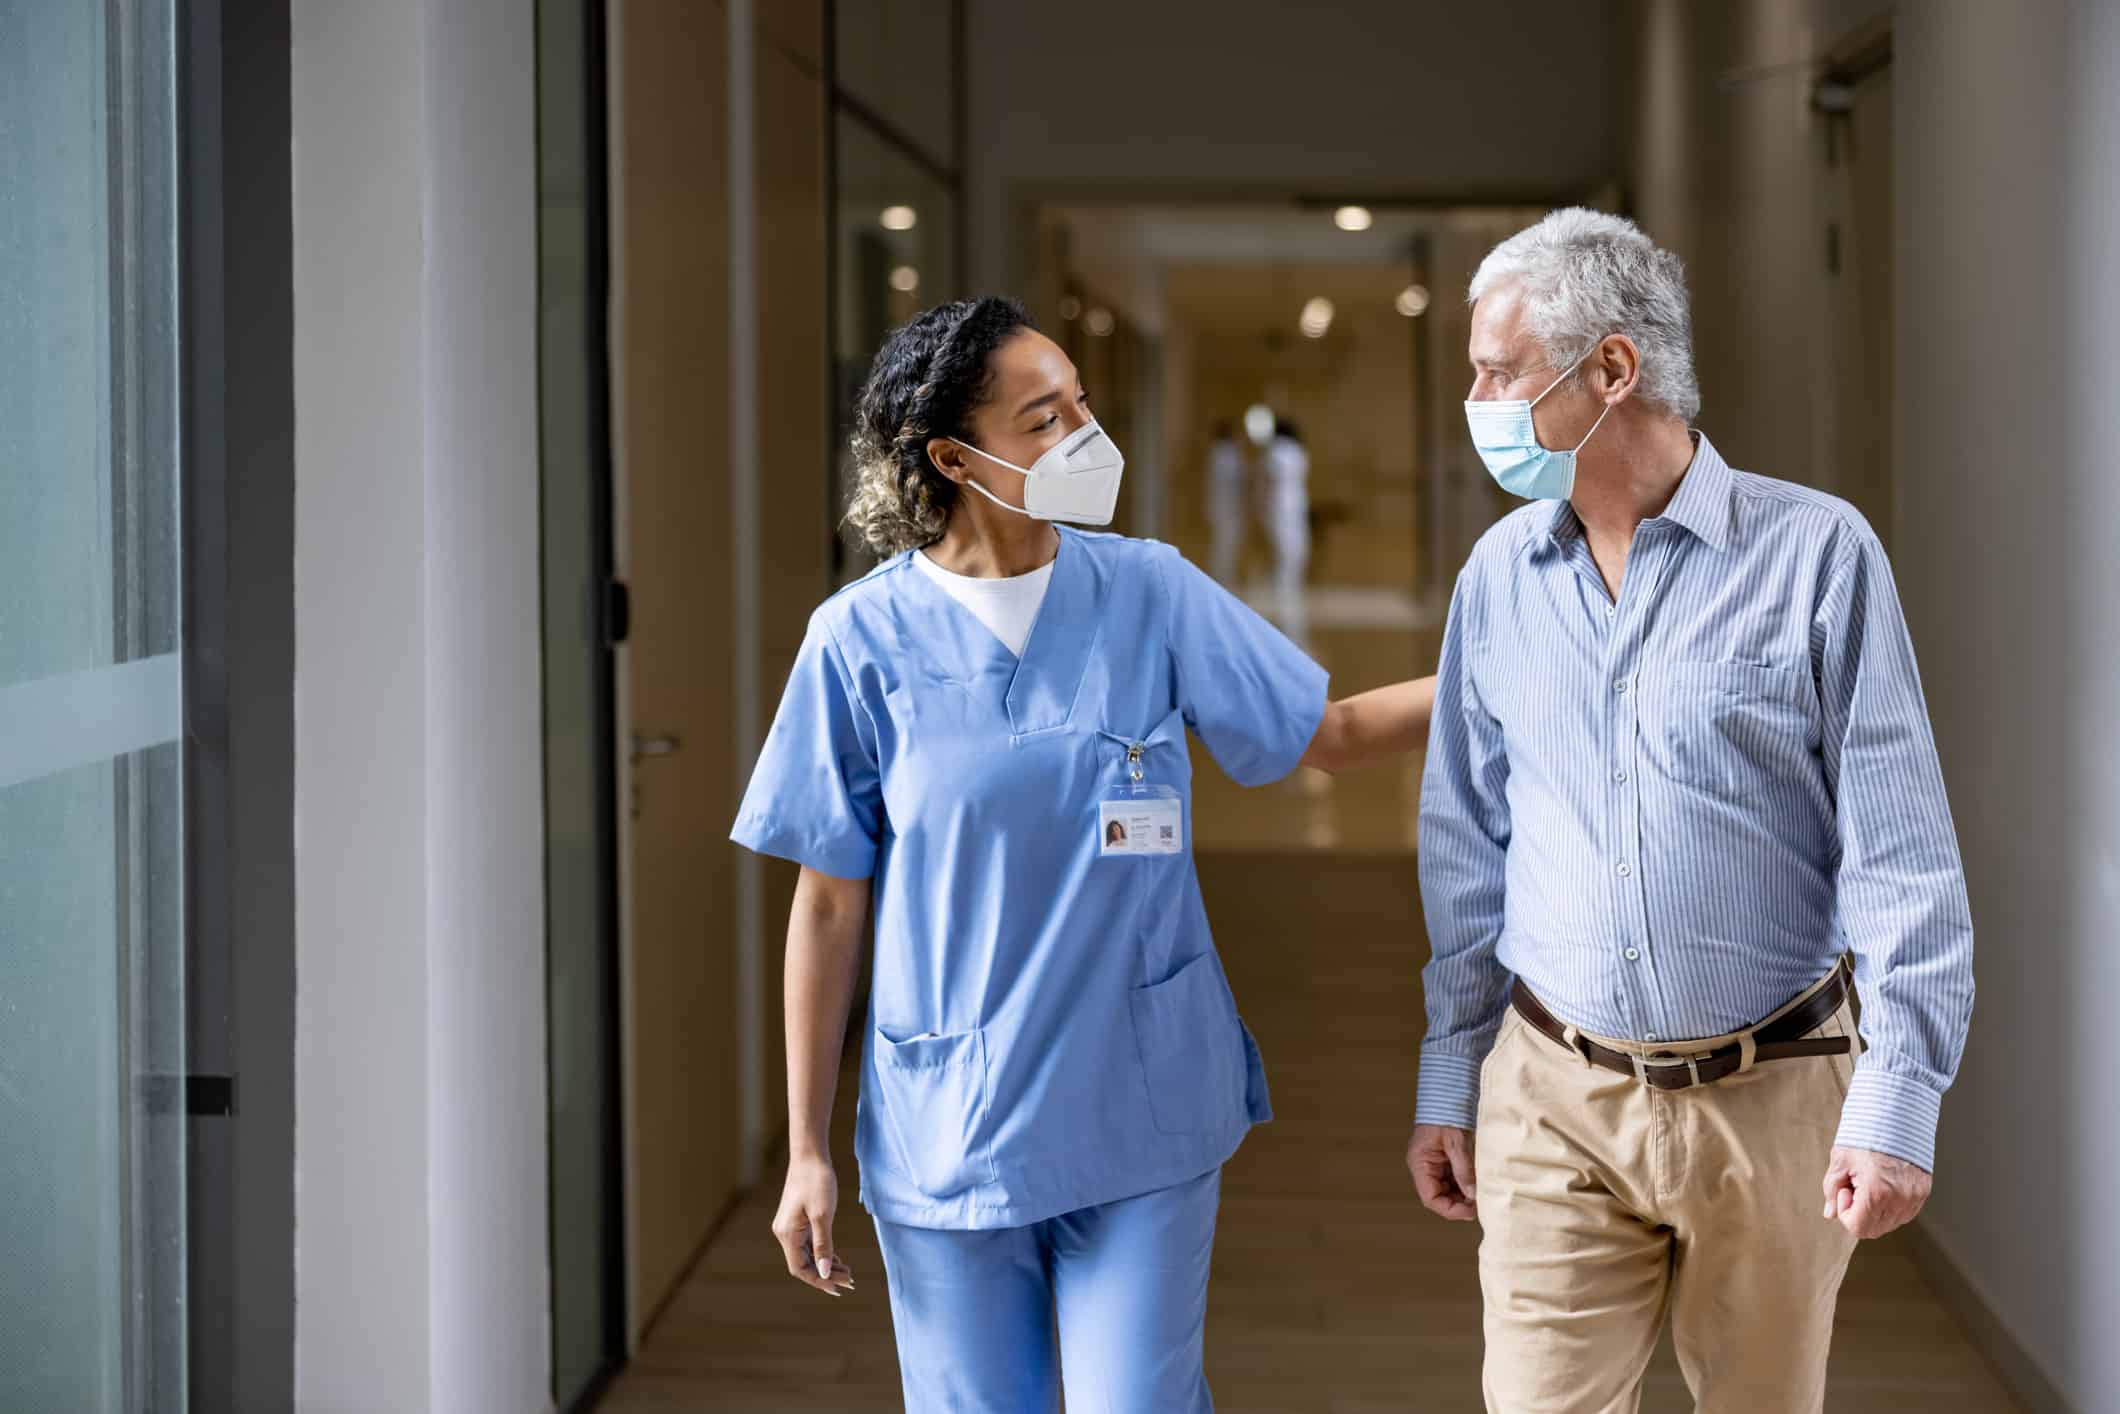 Doctor talking to a patient in the corridor of a hospital.